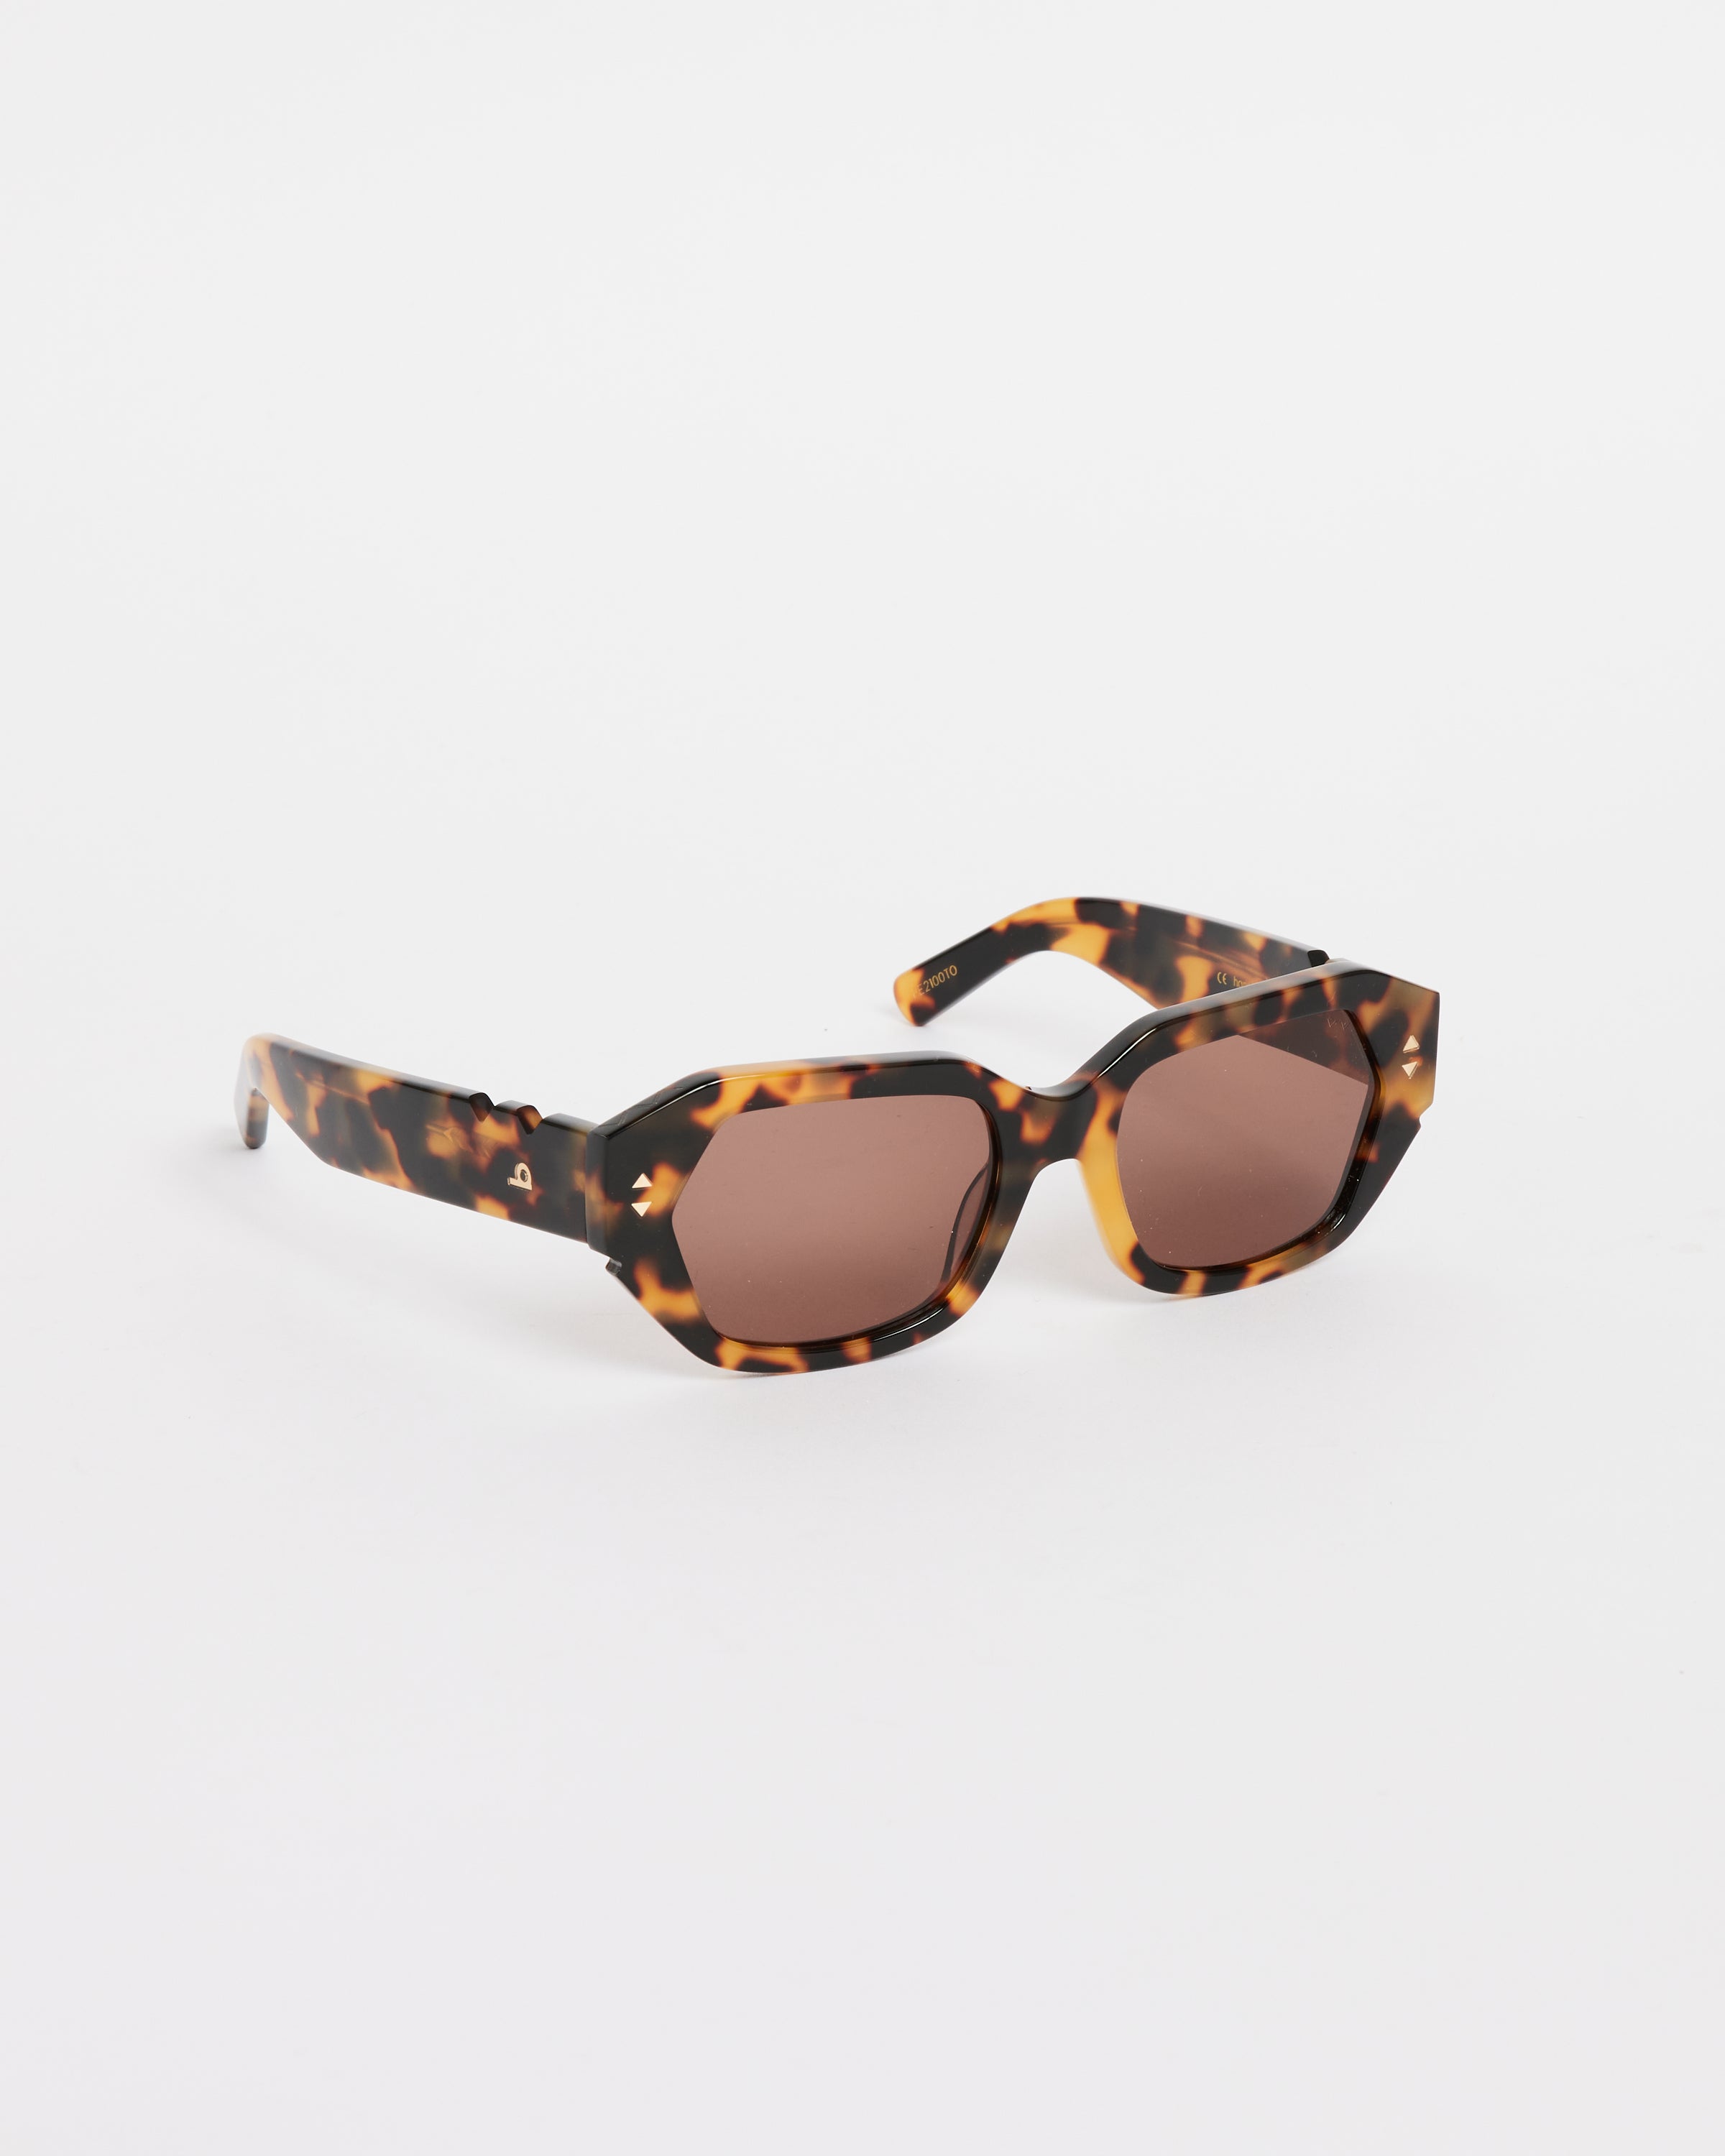 Small & Mighty Sunglasses in Tortoise